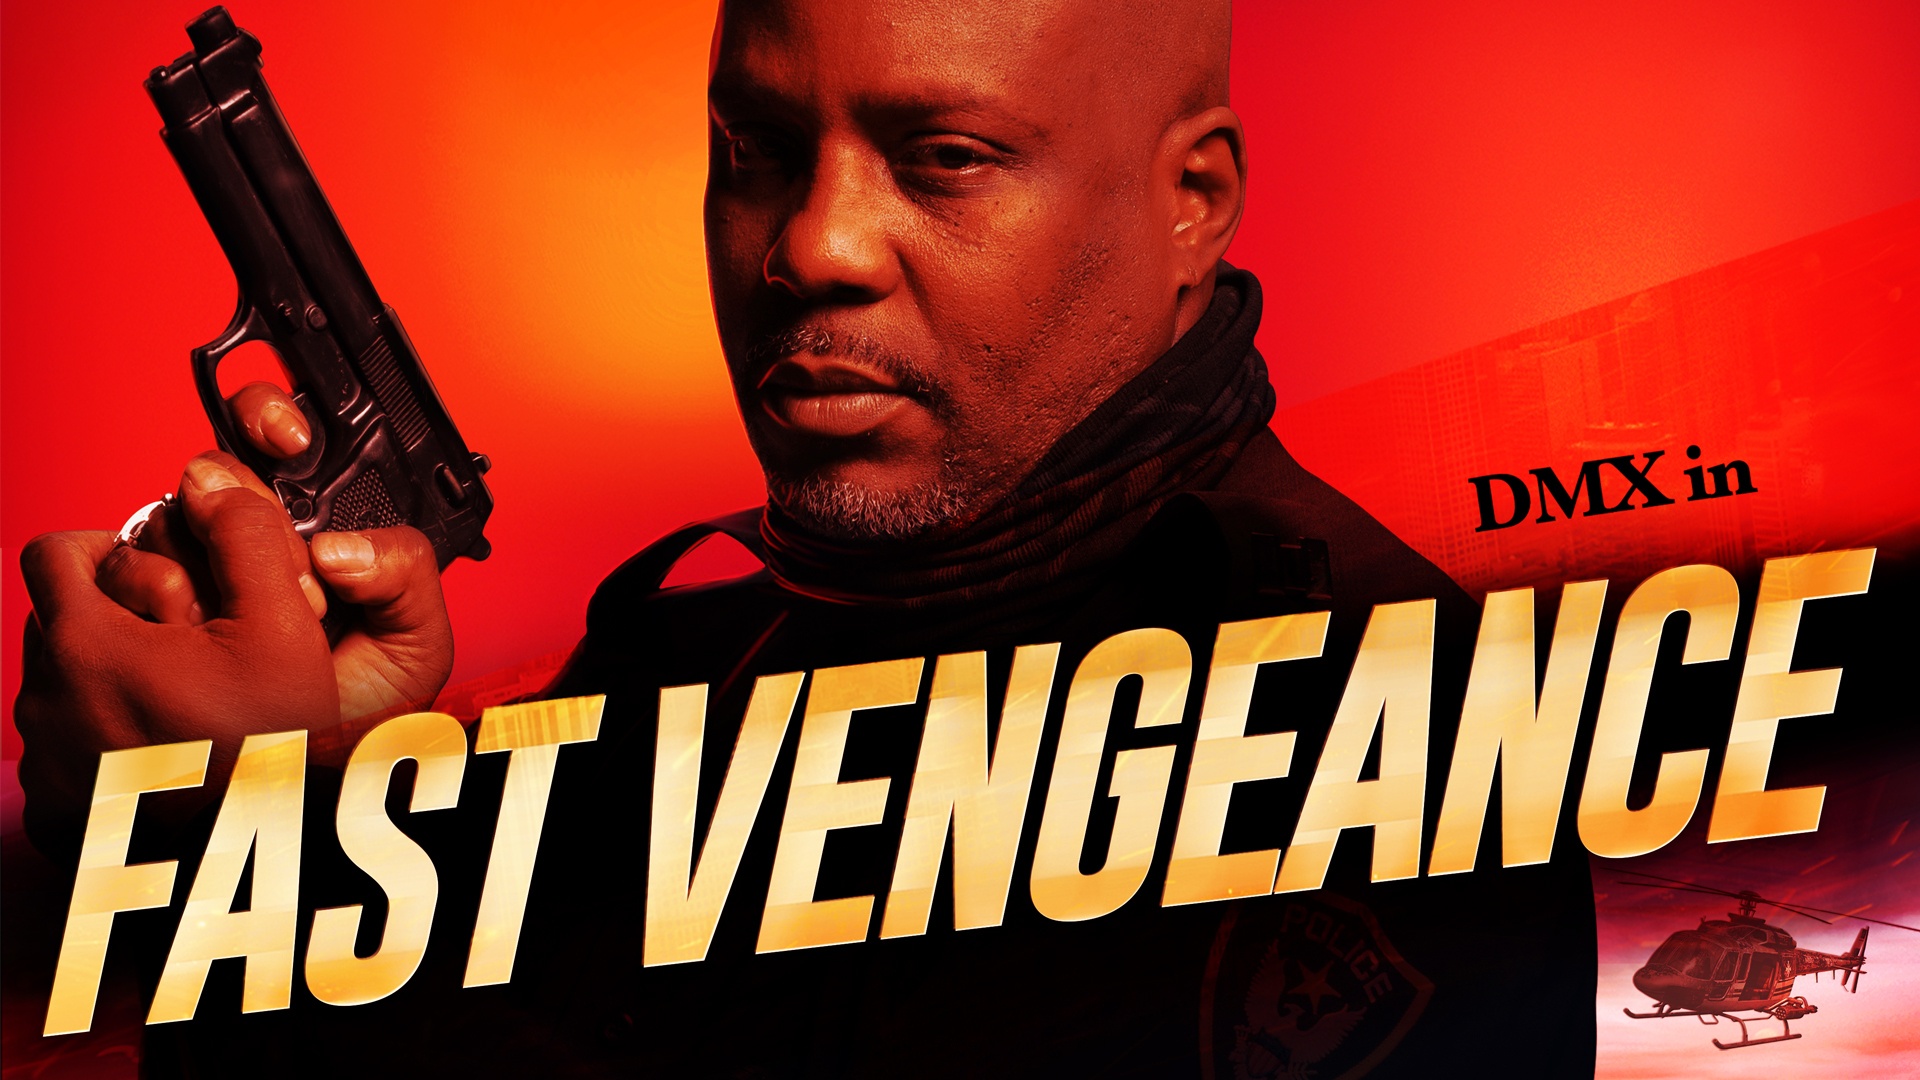 DMX’s ‘Fast Vengeance’ is Streaming Exclusively on Tubi